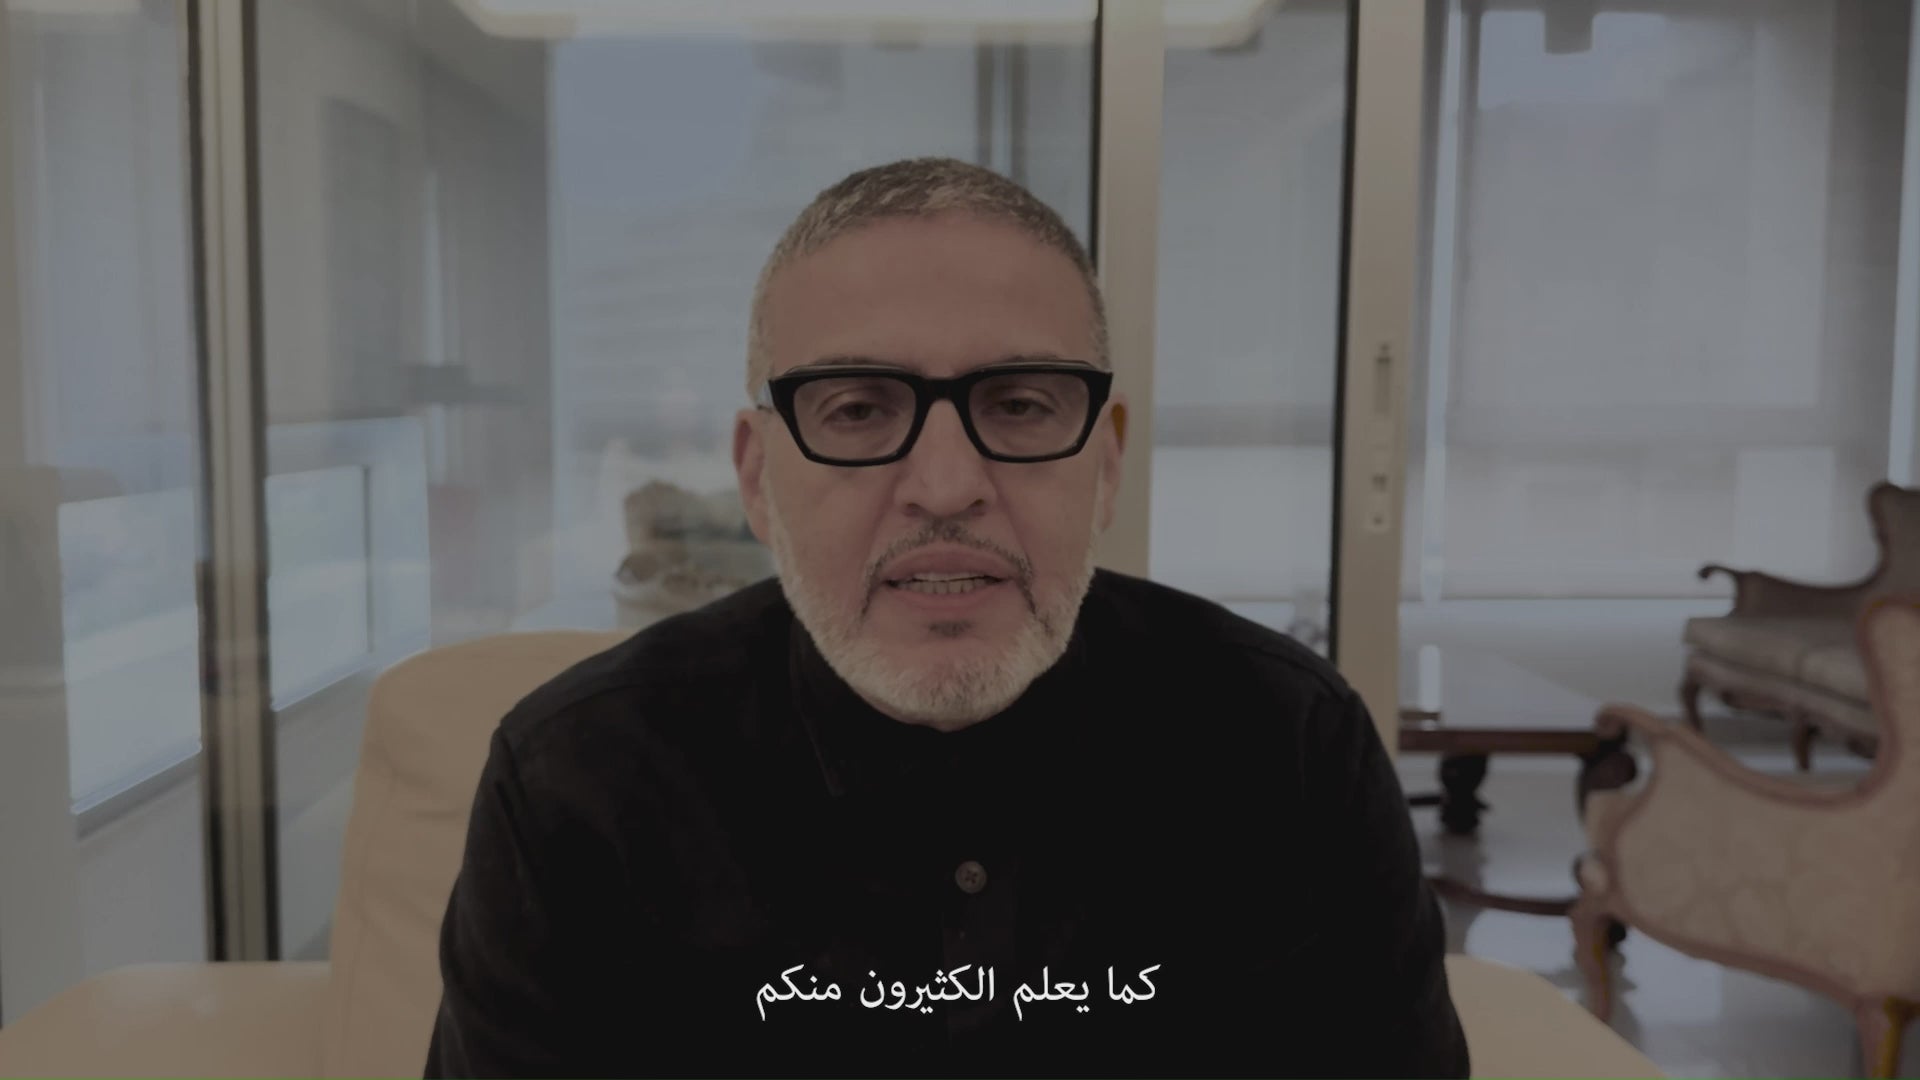 Load video: A message from Dr. Ghassan Abu Sitta